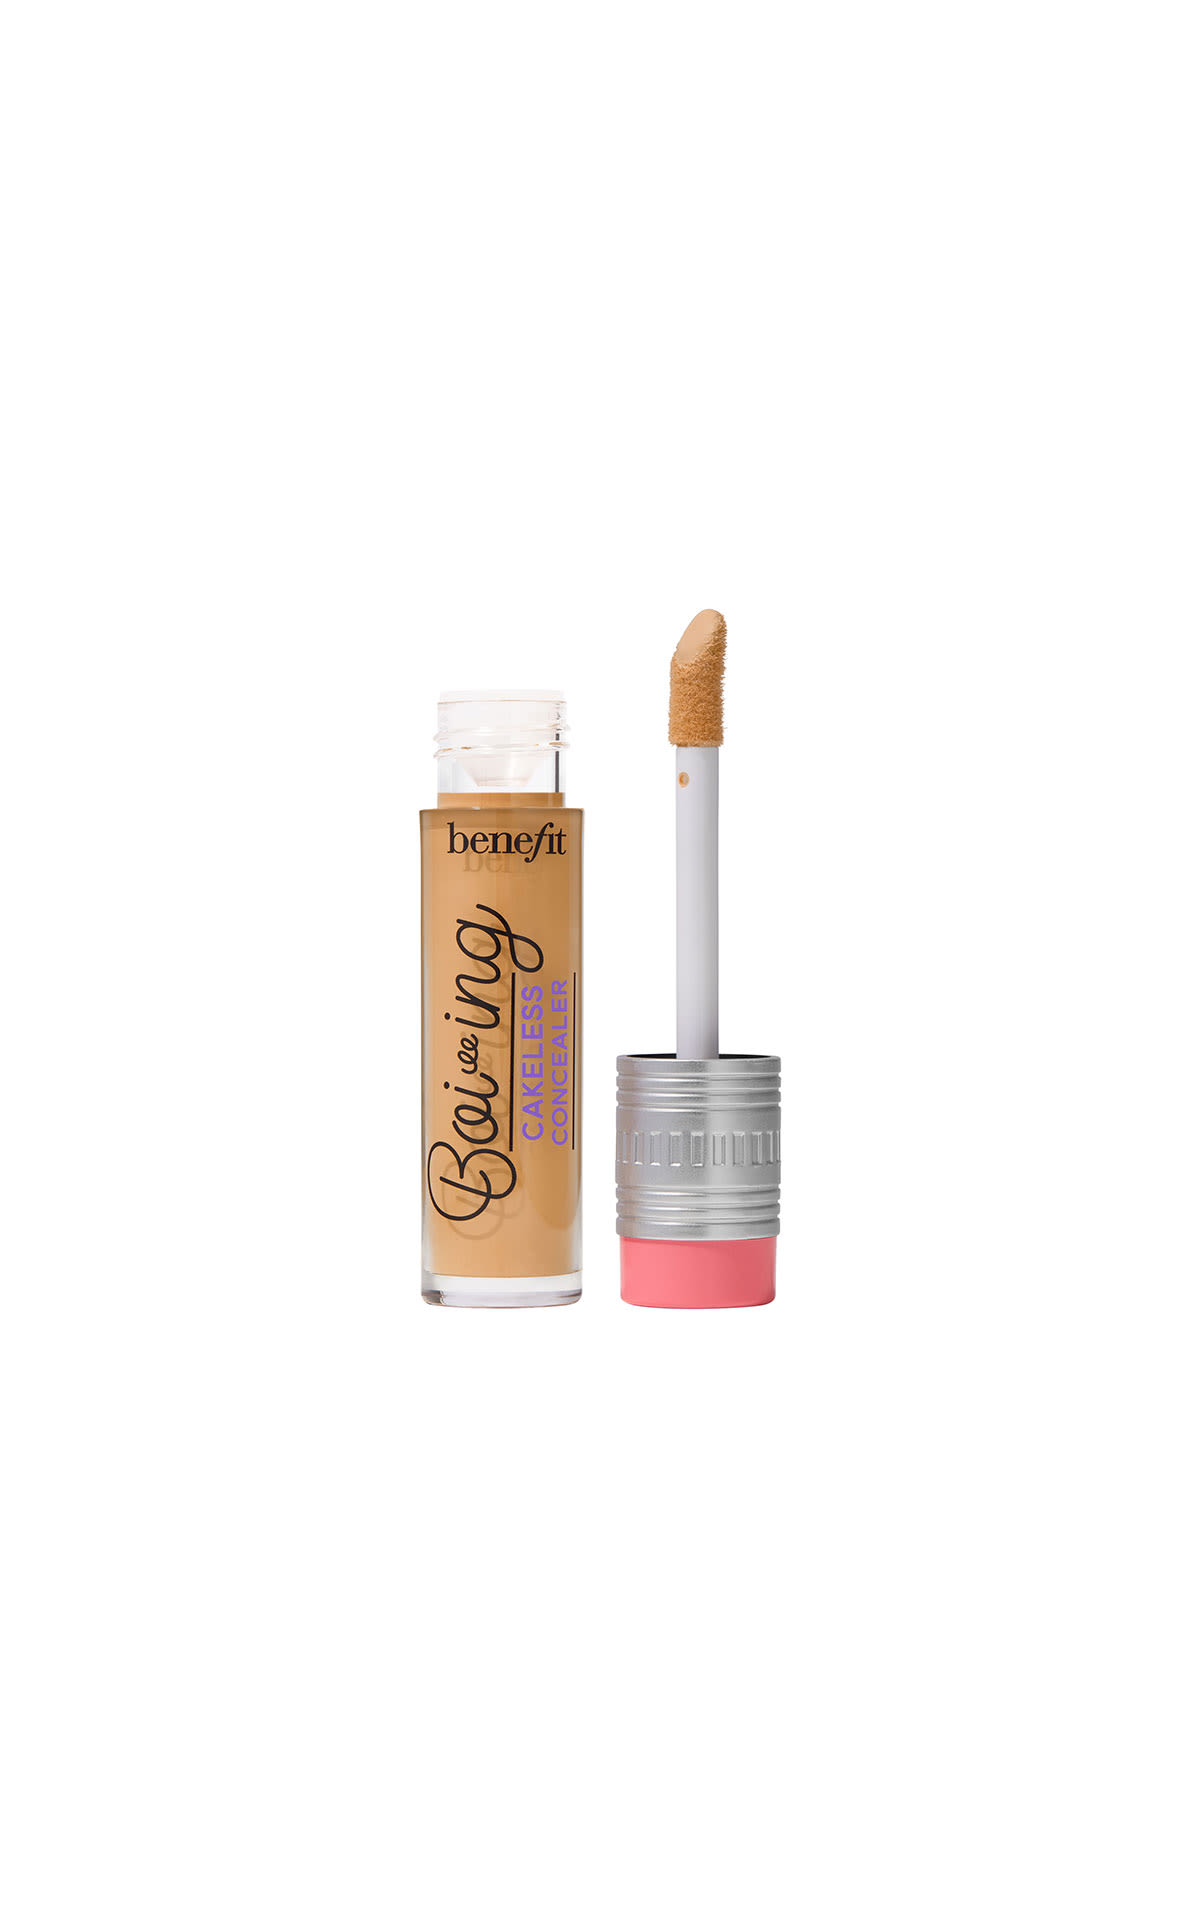 Benefit Cosmetics BOI-ing cakeless concealer  from Bicester Village